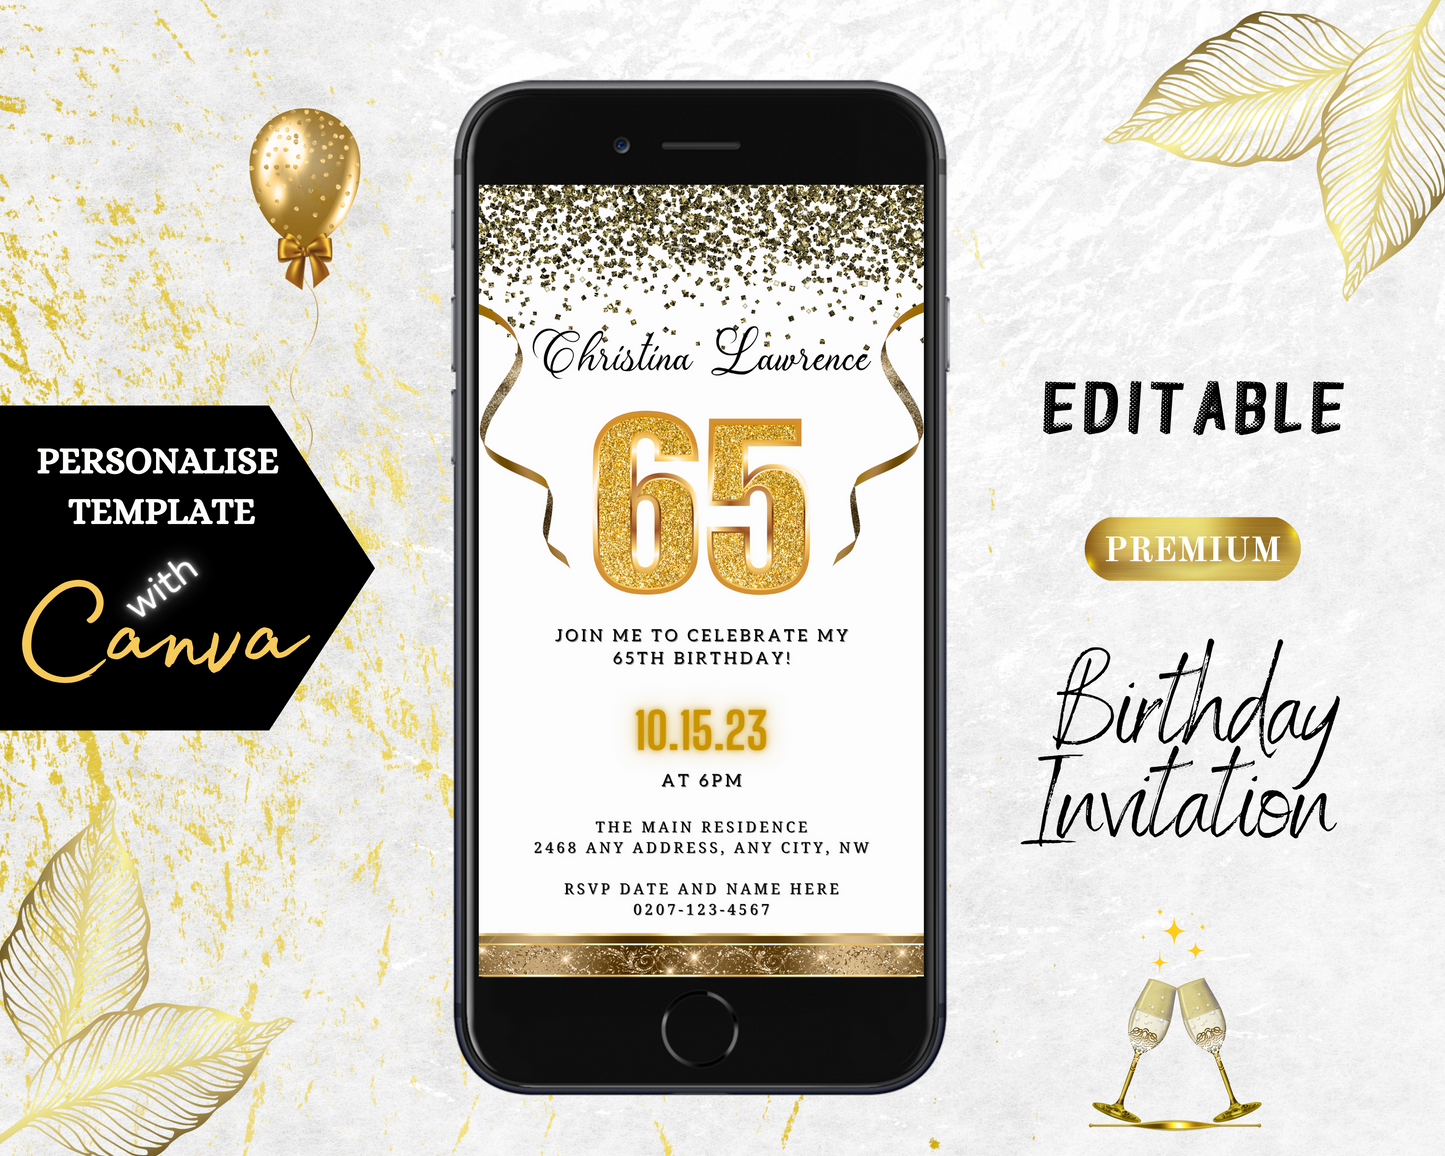 Customizable White Gold Confetti 65th Birthday Evite displayed on a smartphone screen, showcasing editable text and design elements for digital invitations.